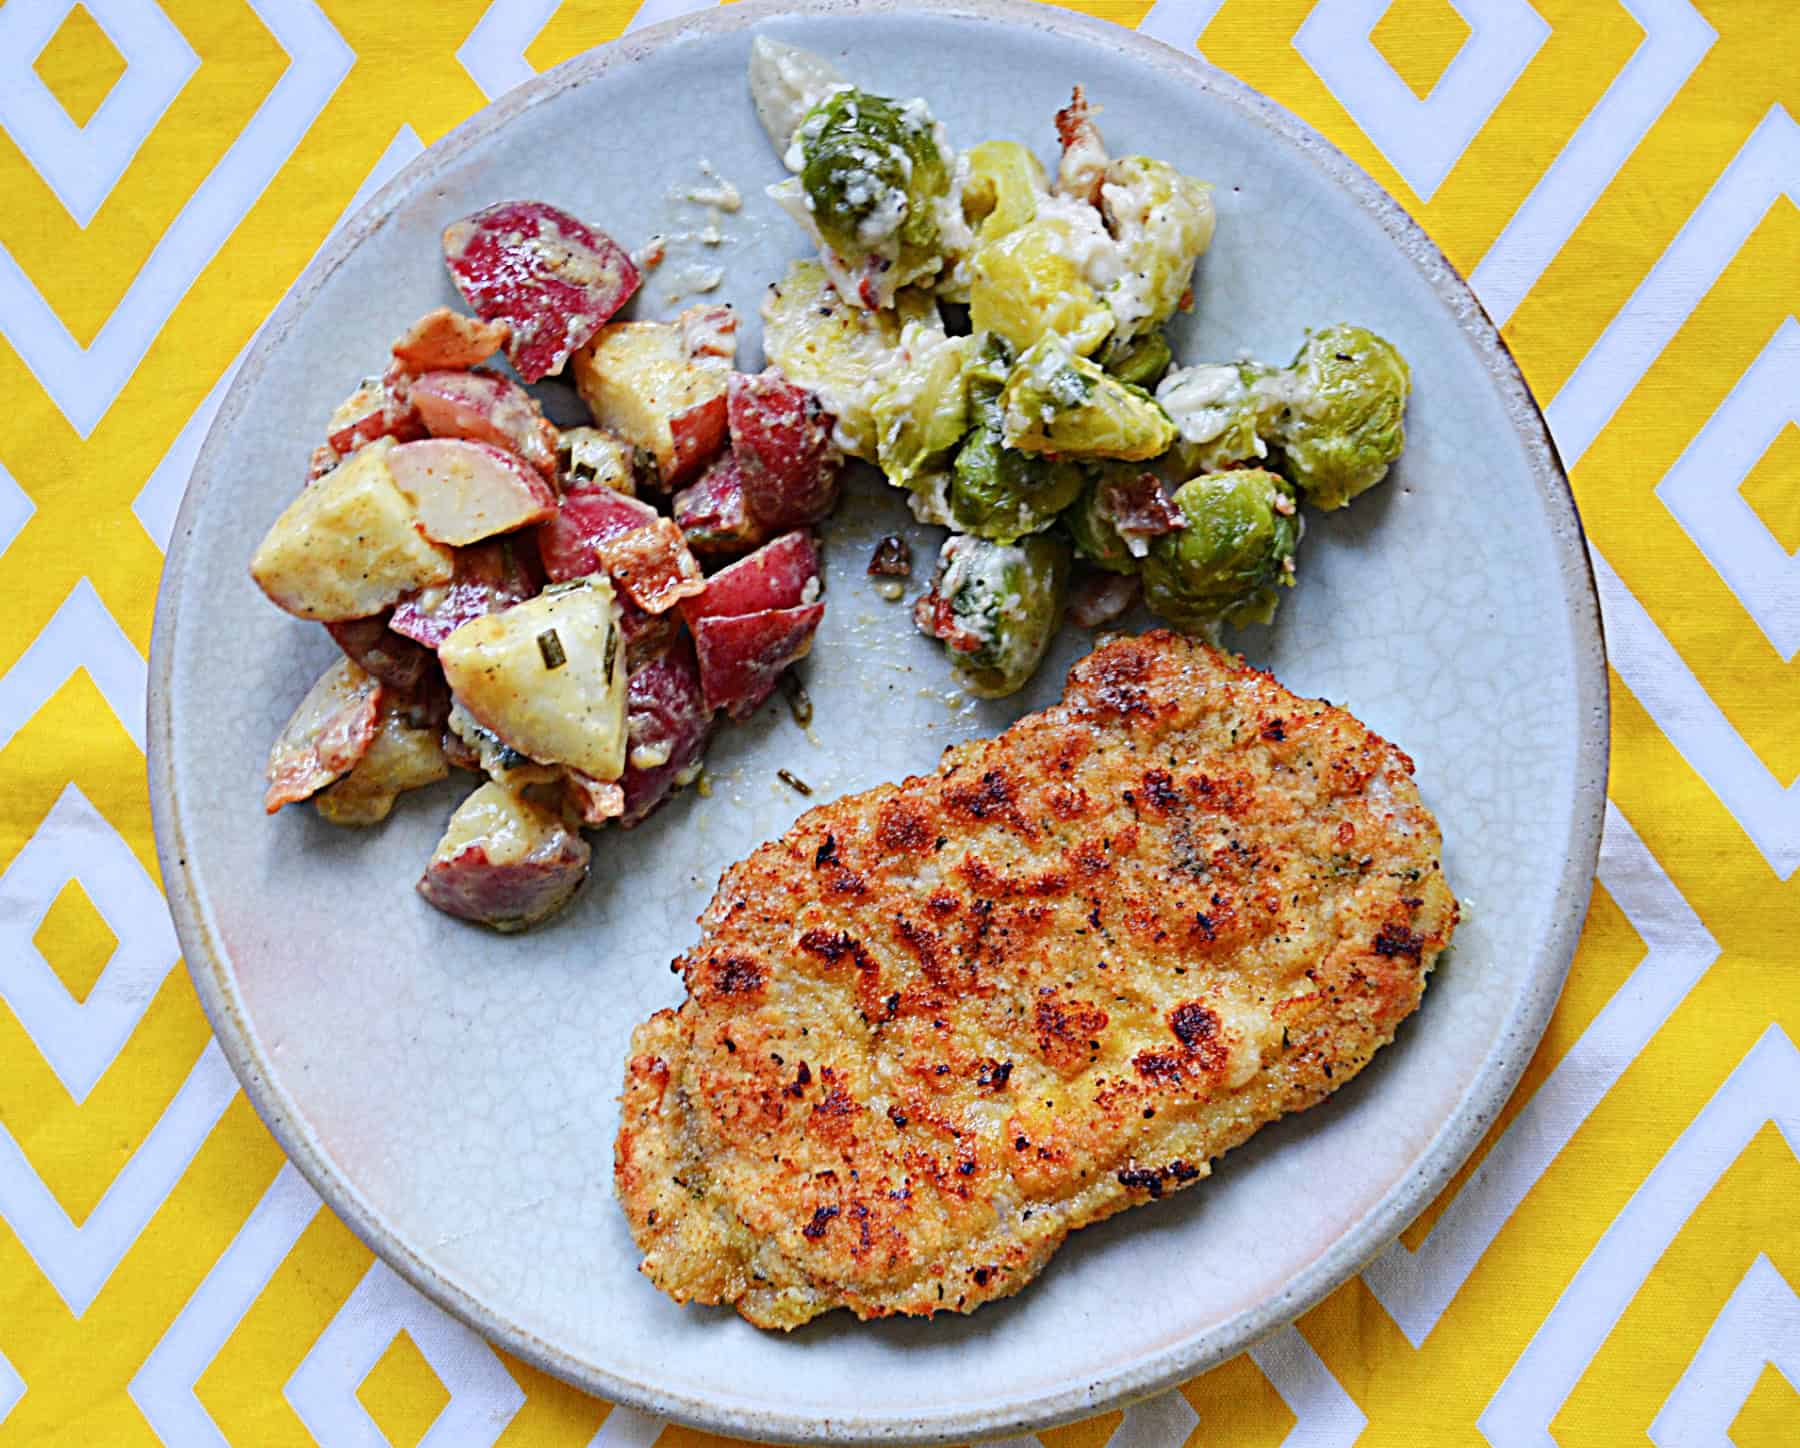 A plate of pork schnitzel, German potato salad, and Brussels Sprouts.